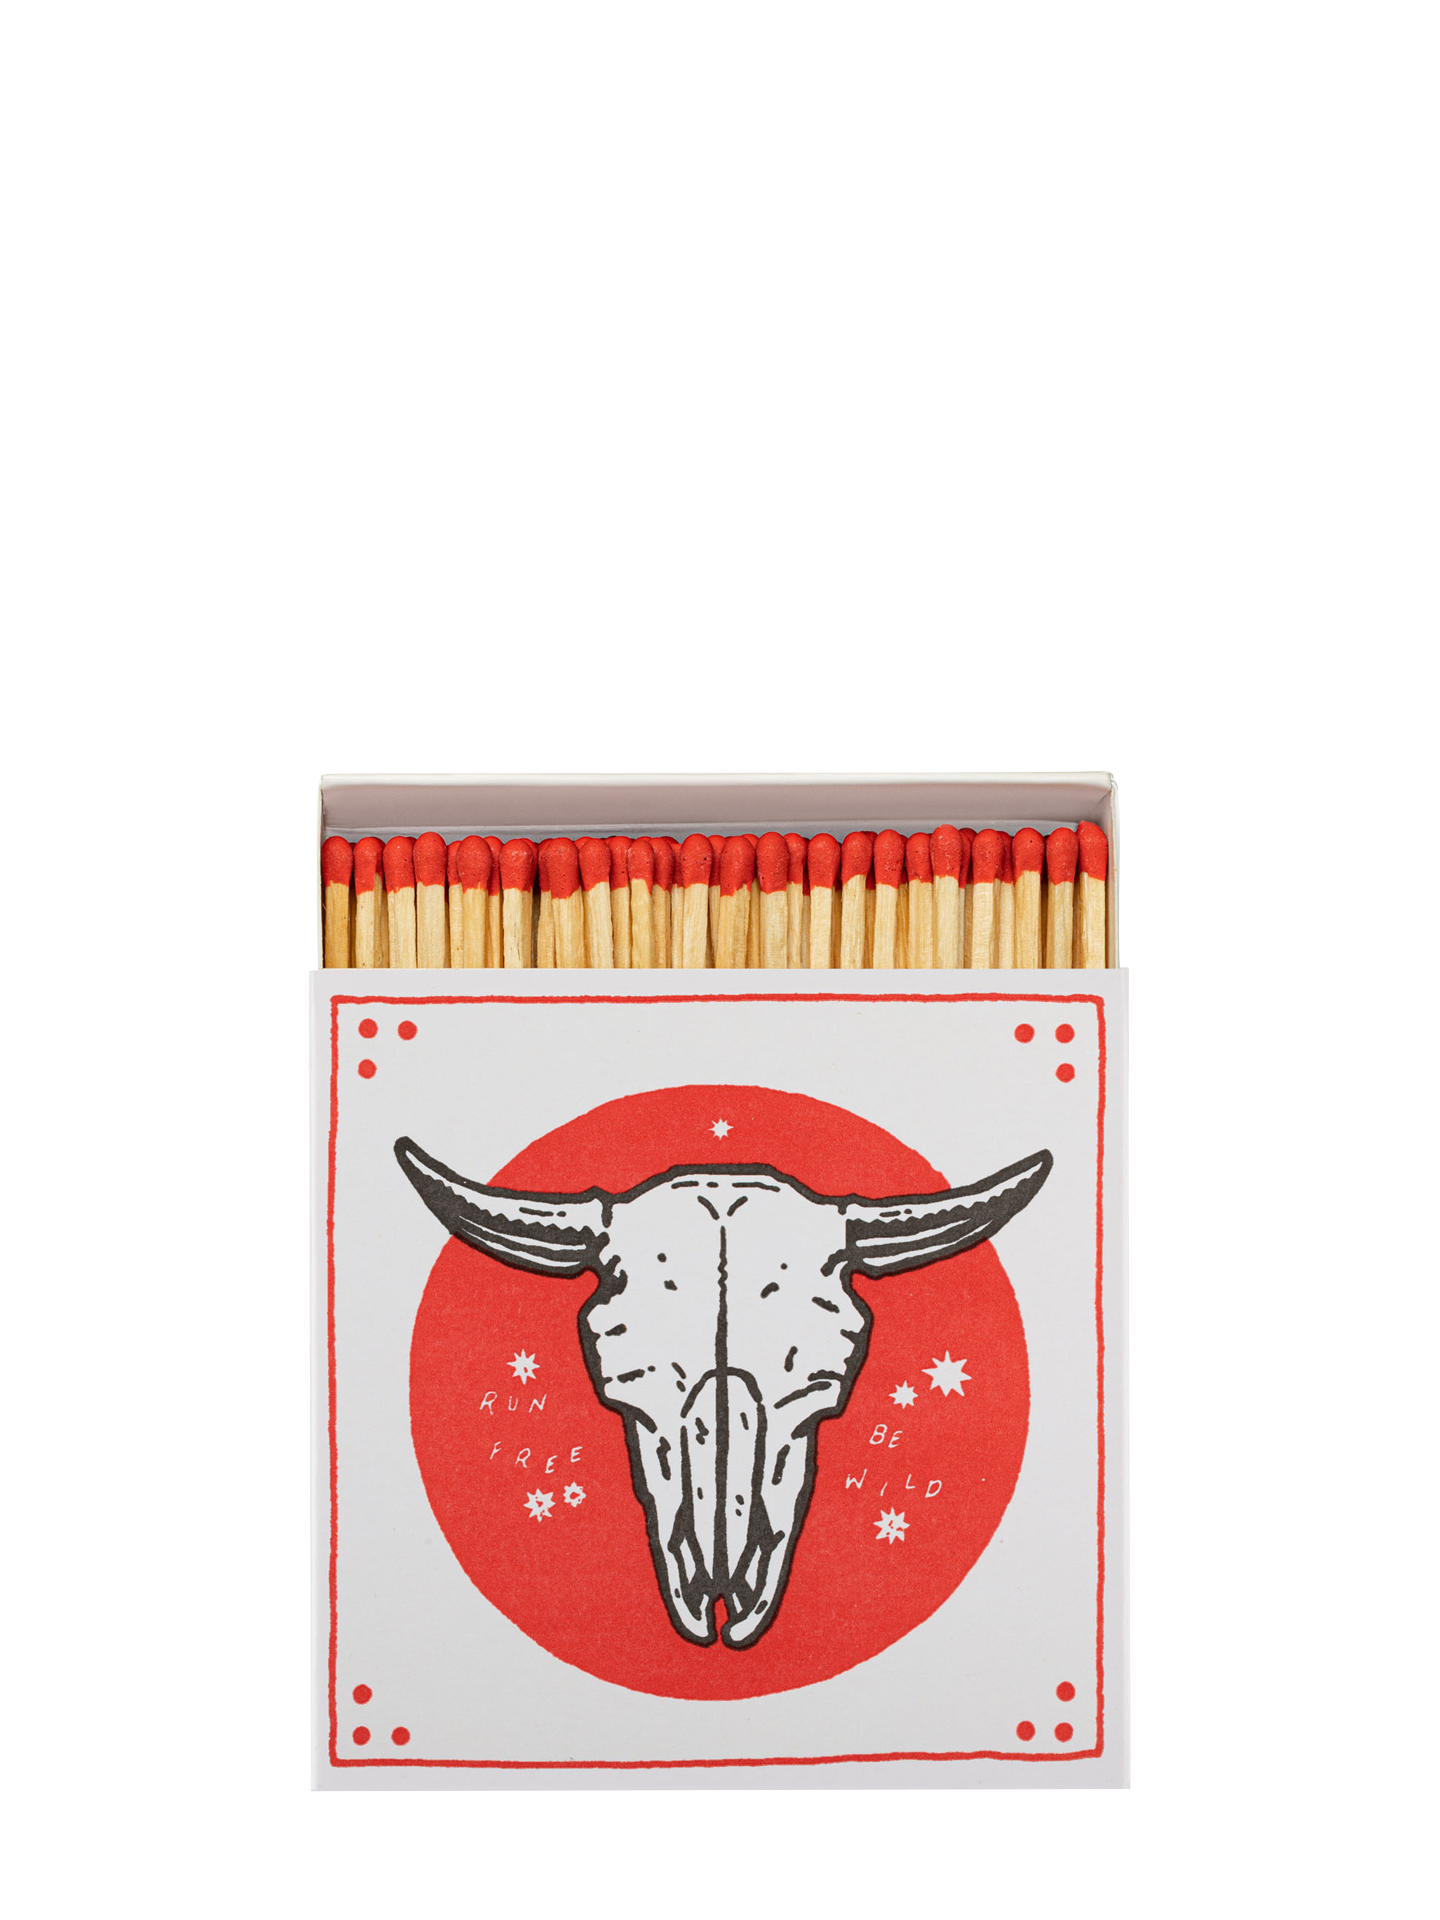 Cattle skull matchbox with Saint No